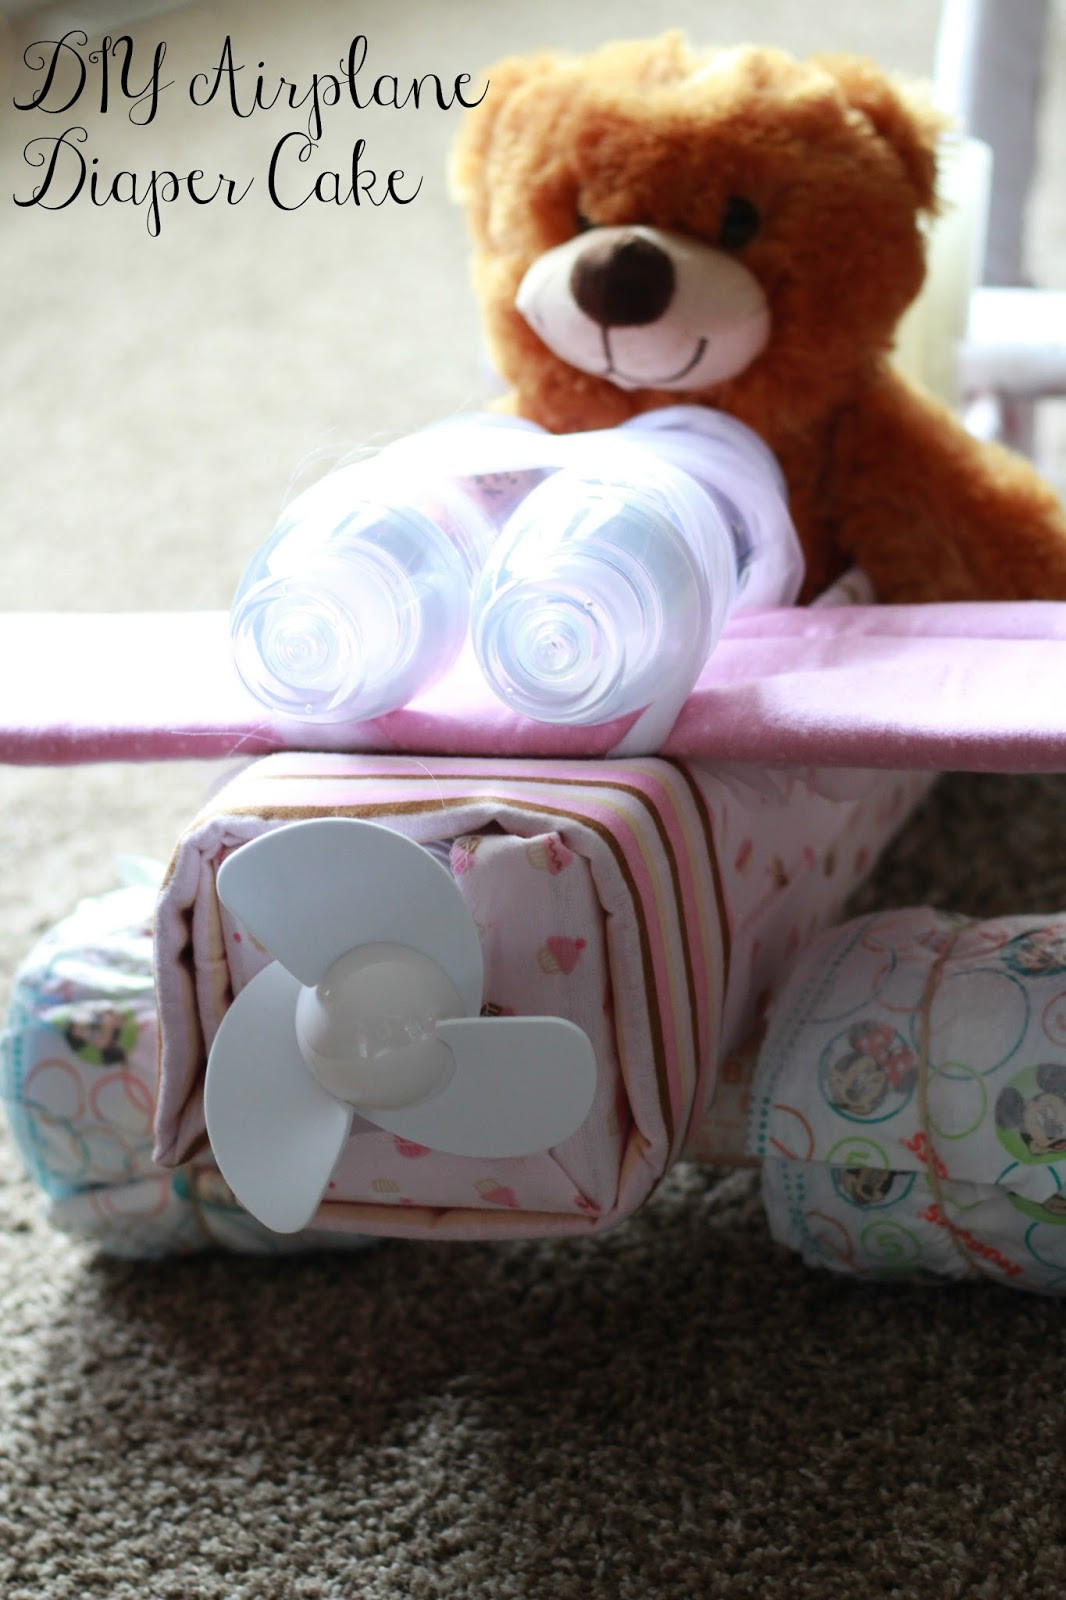 Diy Baby Shower Diaper Cake
 DIY Airplane Diaper Cake Perfect for baby shower ts